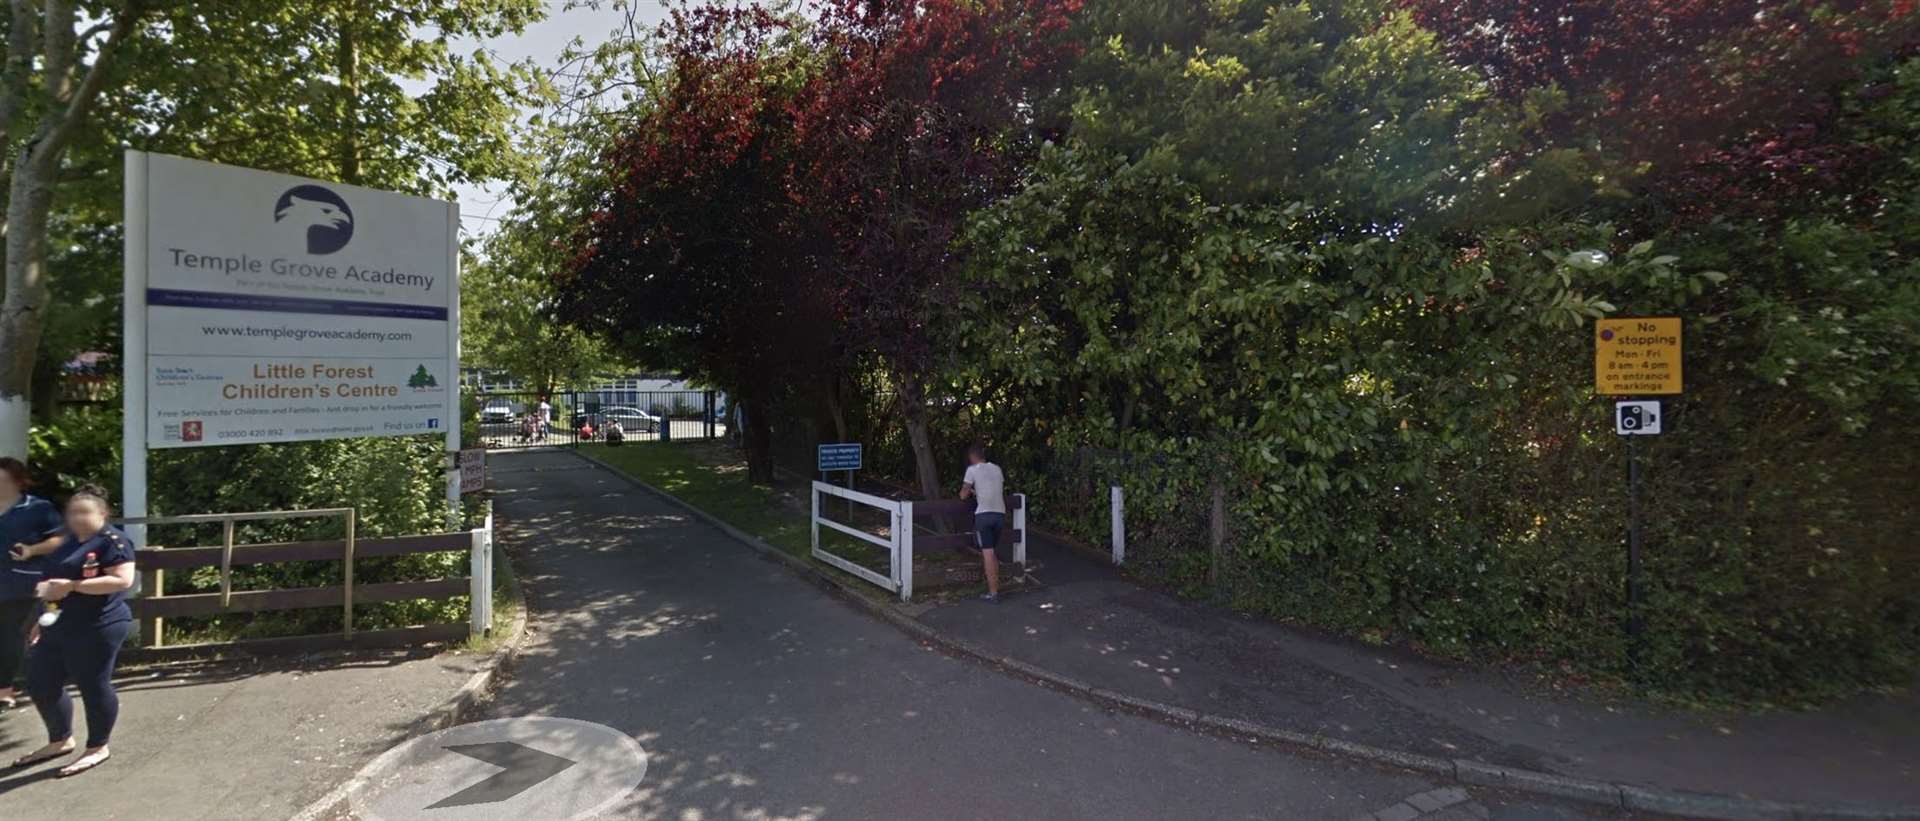 Temple Grove Academy in Tunbridge Wells has confirmed two Strep A cases. Picture: Google Street View